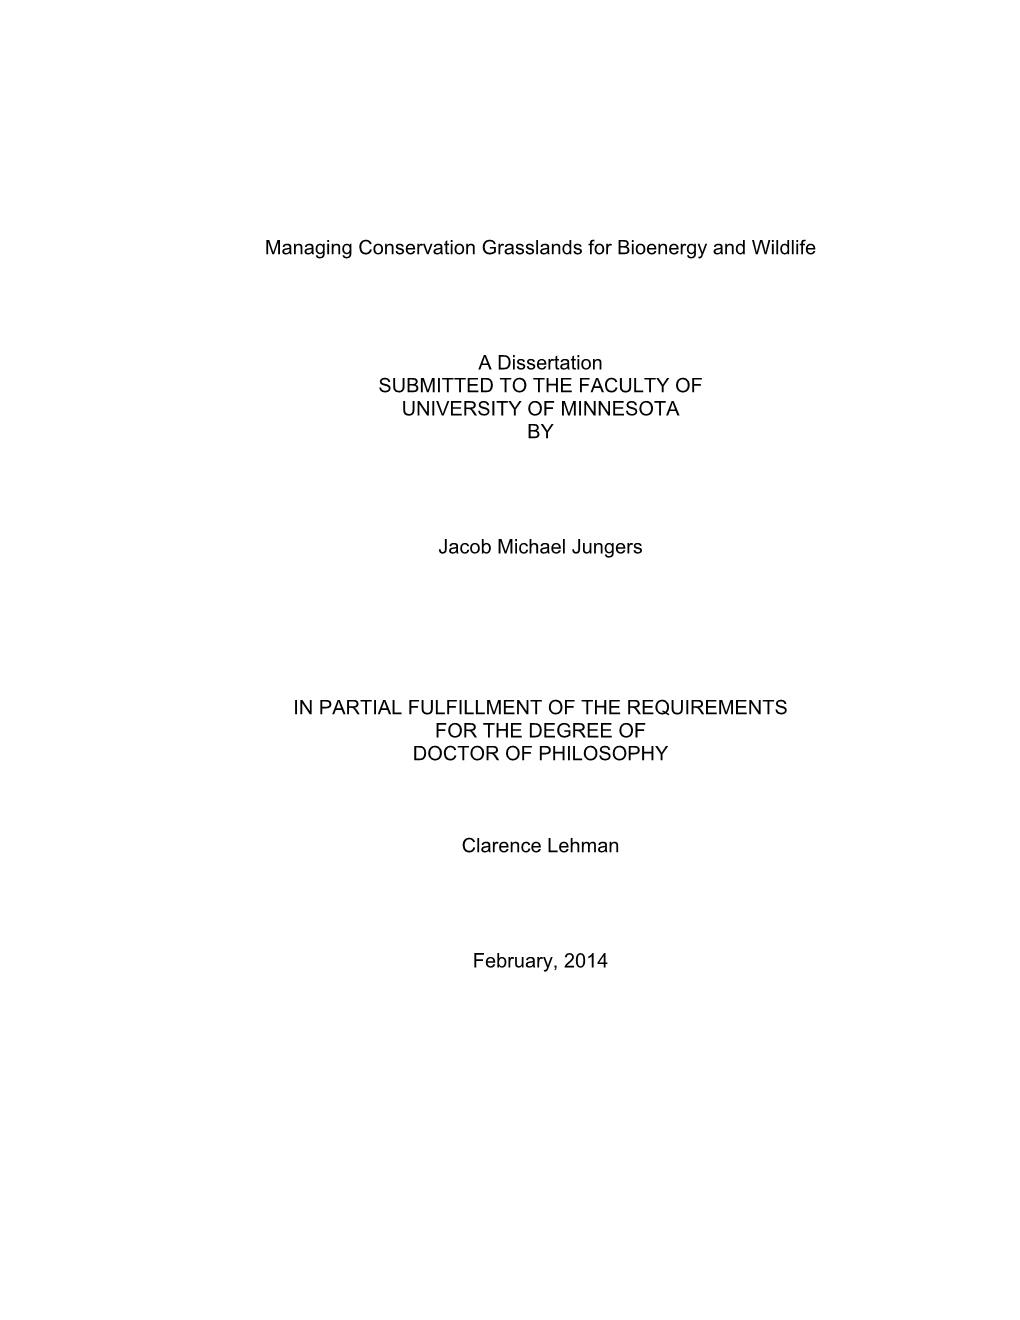 Managing Conservation Grasslands for Bioenergy and Wildlife a Dissertation SUBMITTED to the FACULTY of UNIVERSITY of MINNESOTA